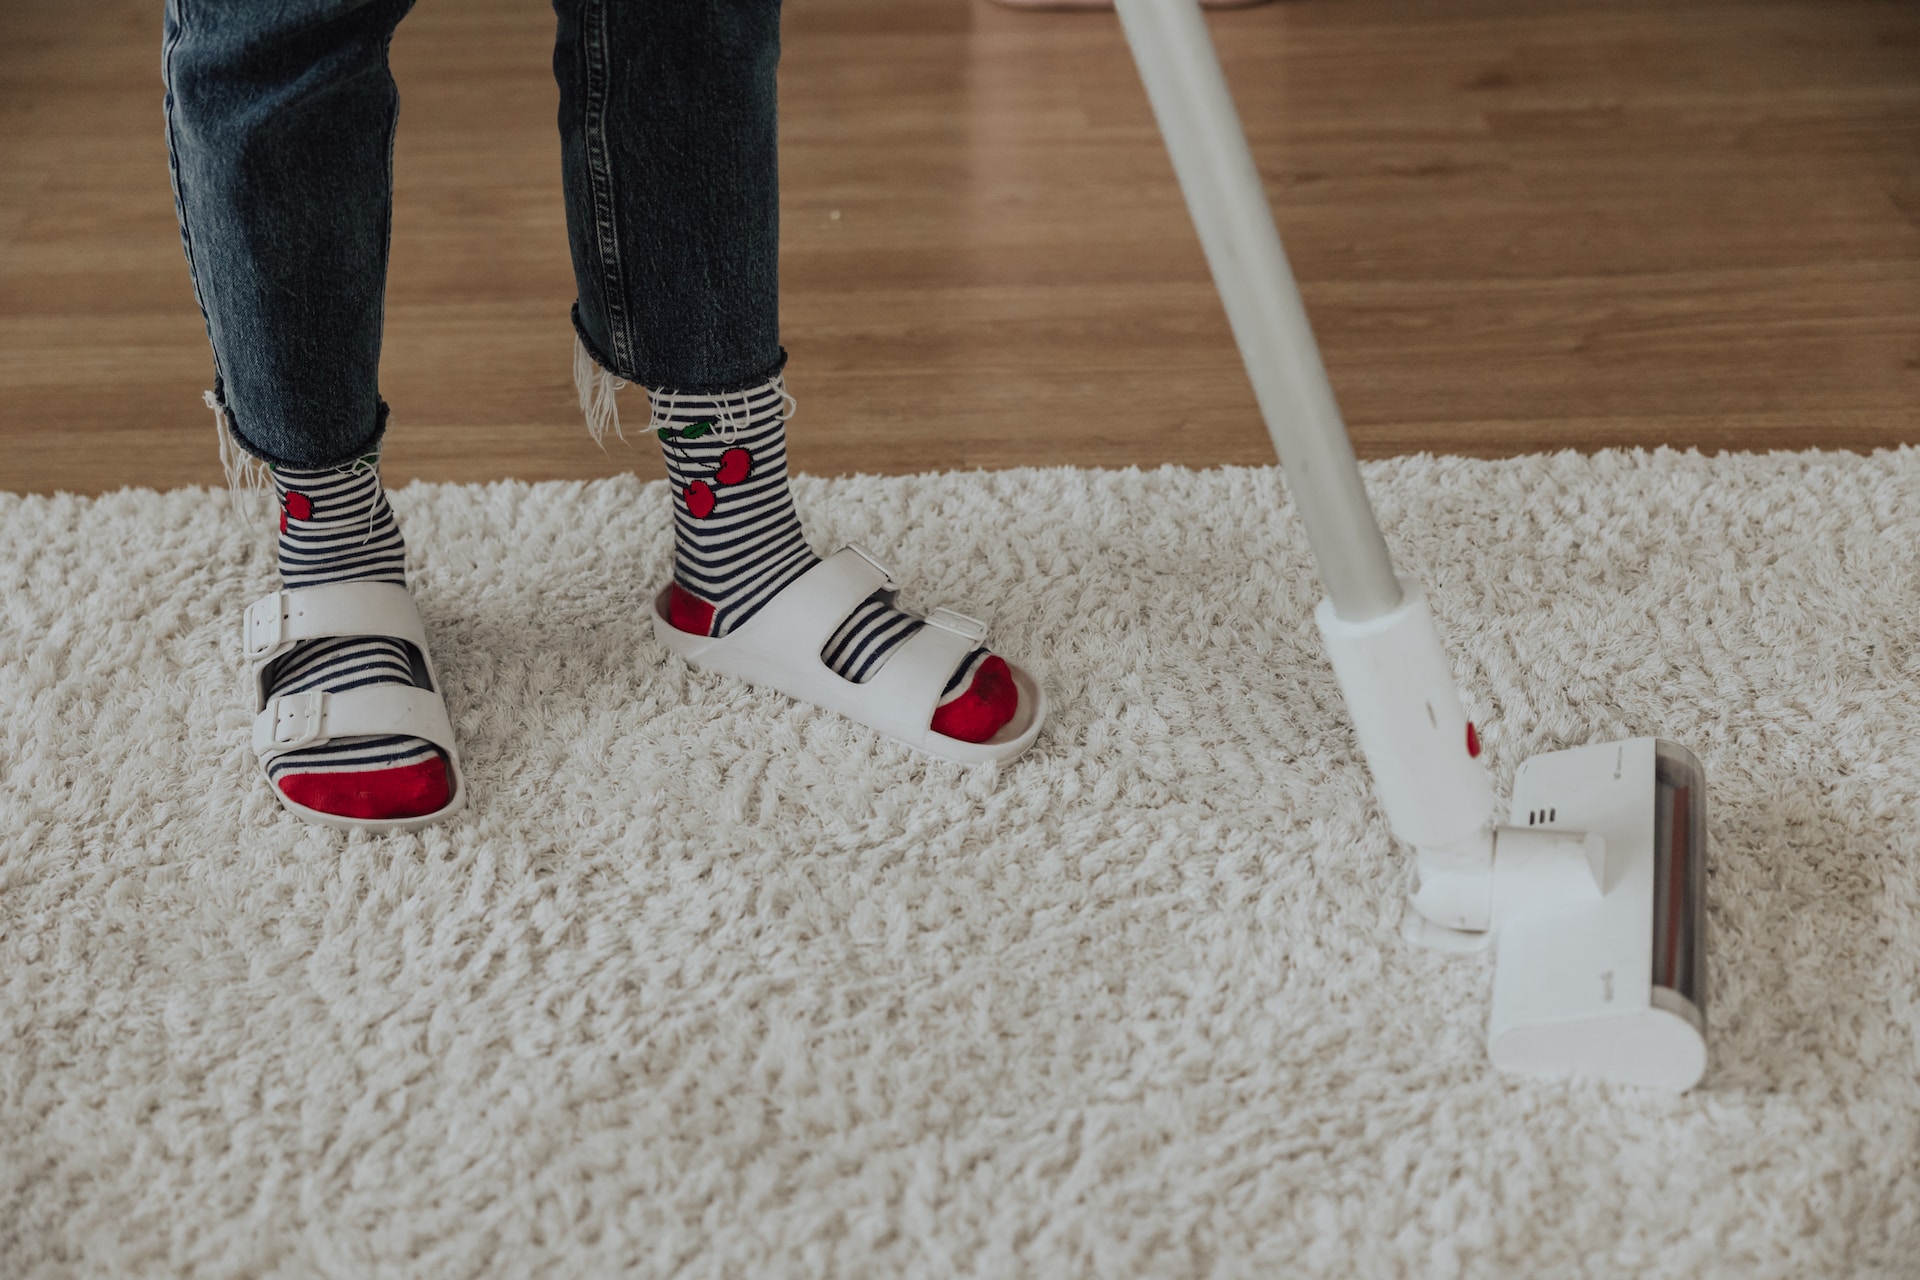 Breathe New Life into Your Home with Professional Carpet Cleaning Services in Anne Arundel County, Maryland